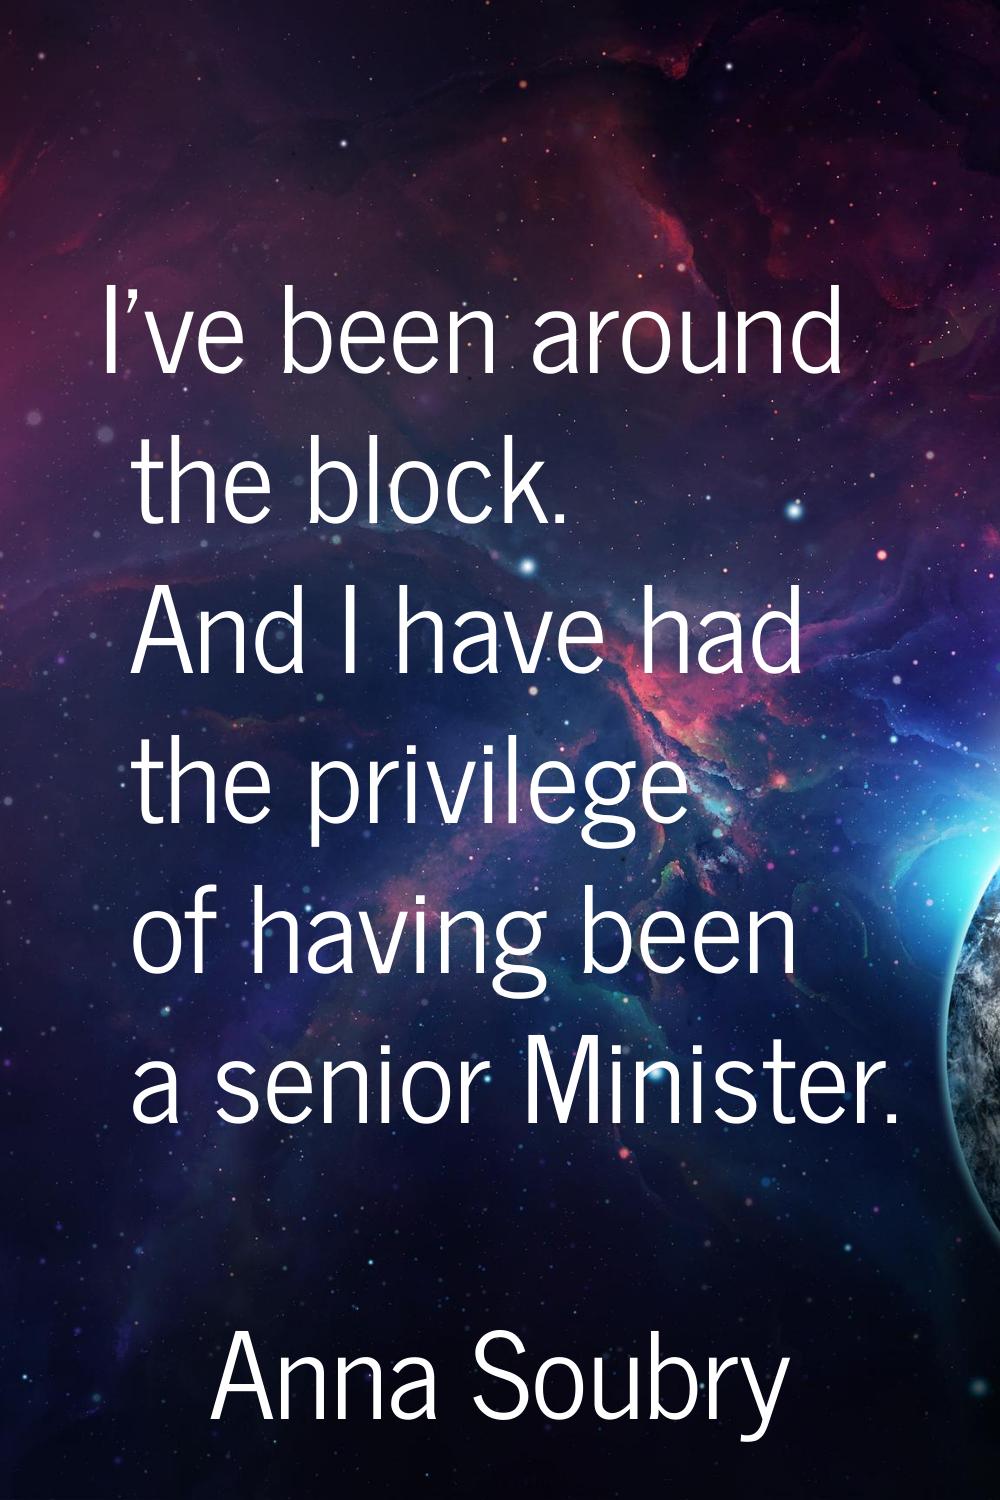 I've been around the block. And I have had the privilege of having been a senior Minister.